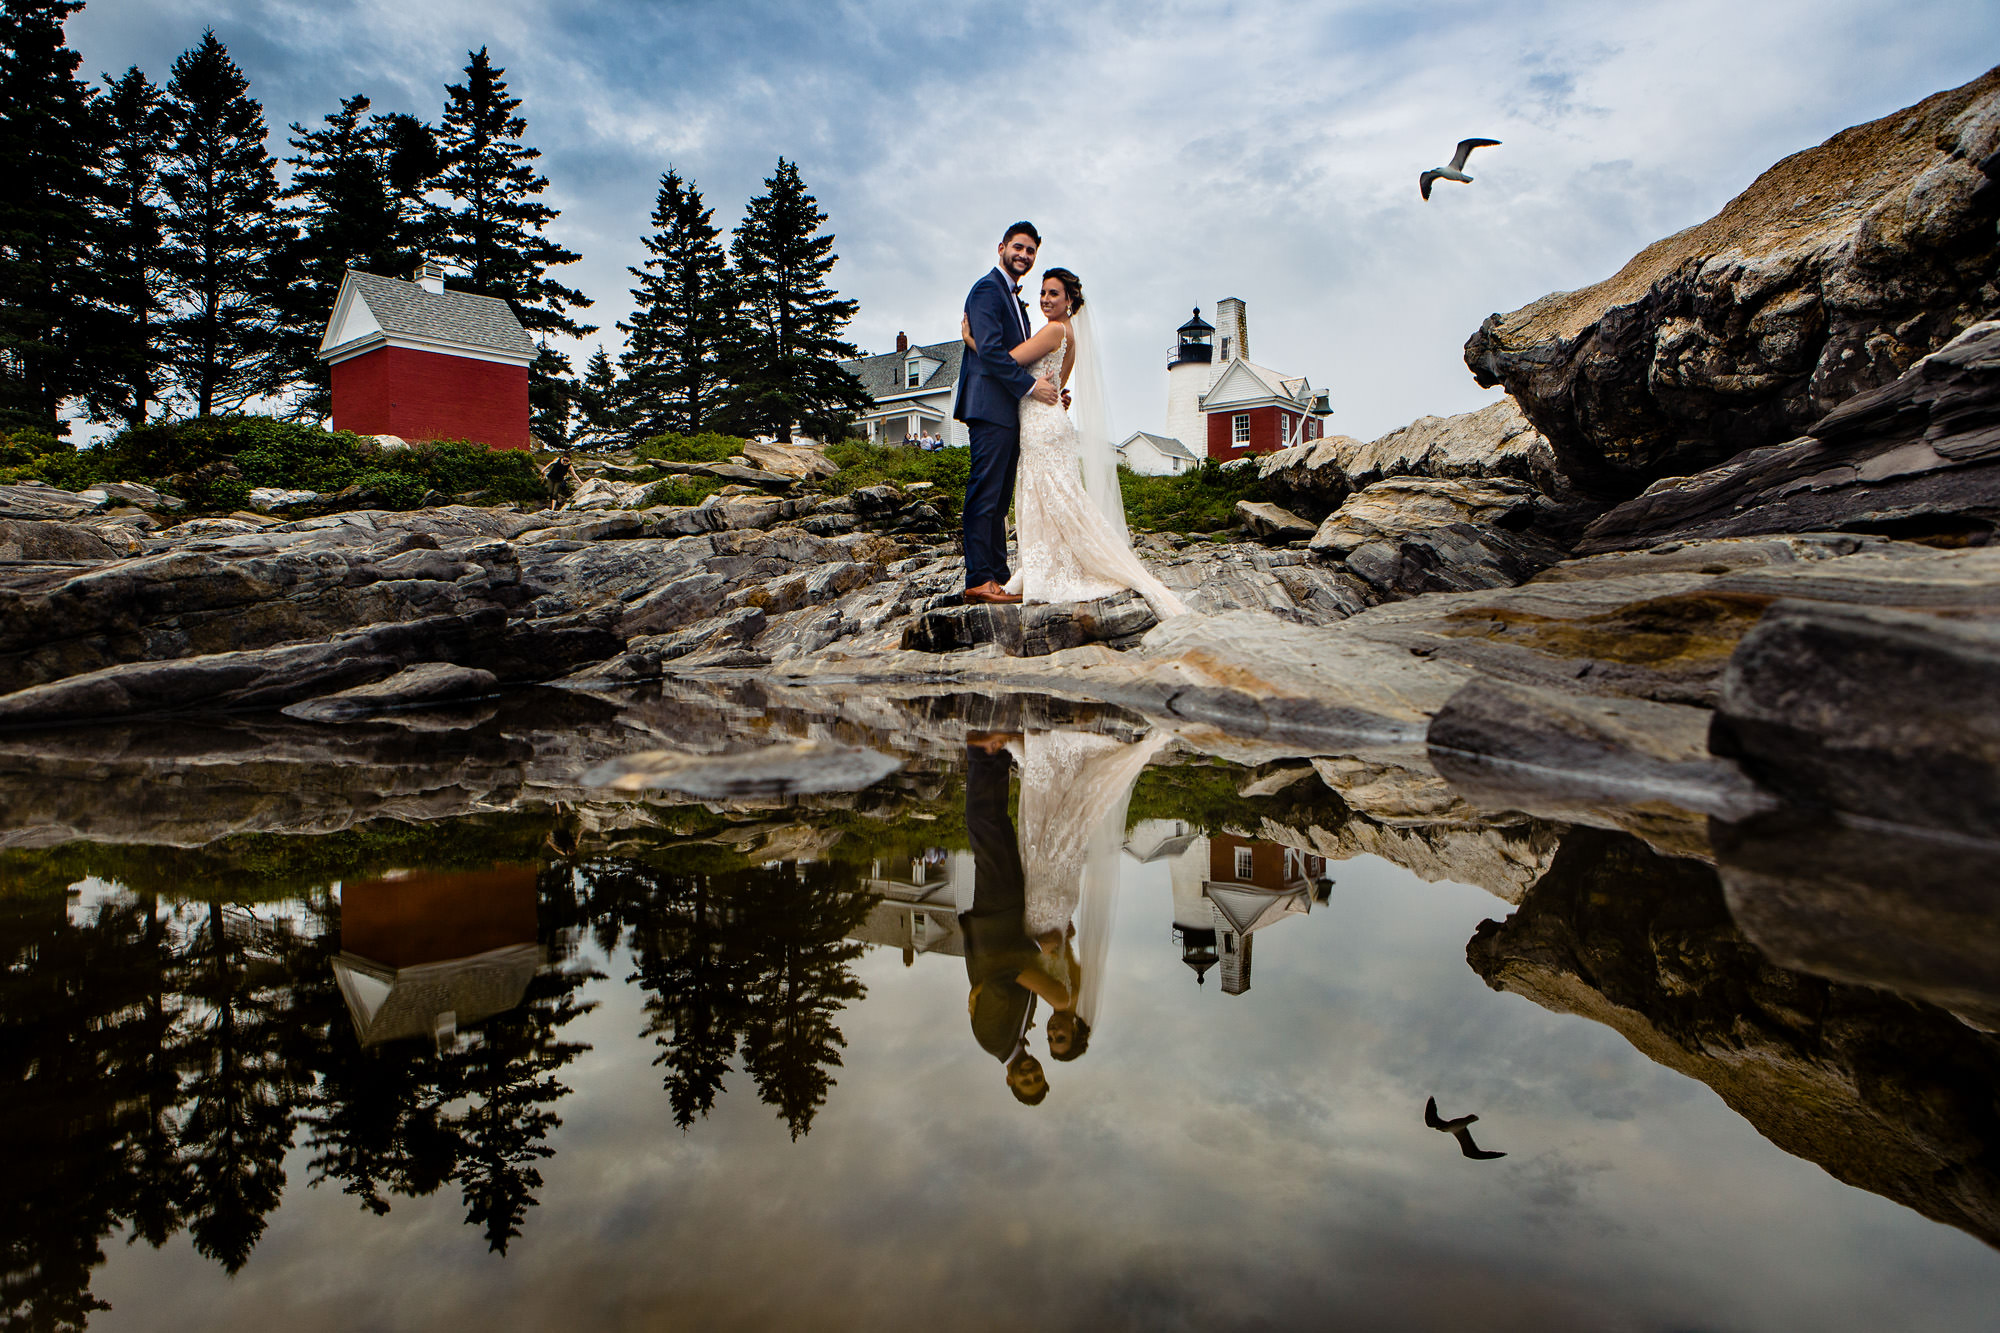 Creative wedding portraits at Pemaquid Point Lighthouse in Maine